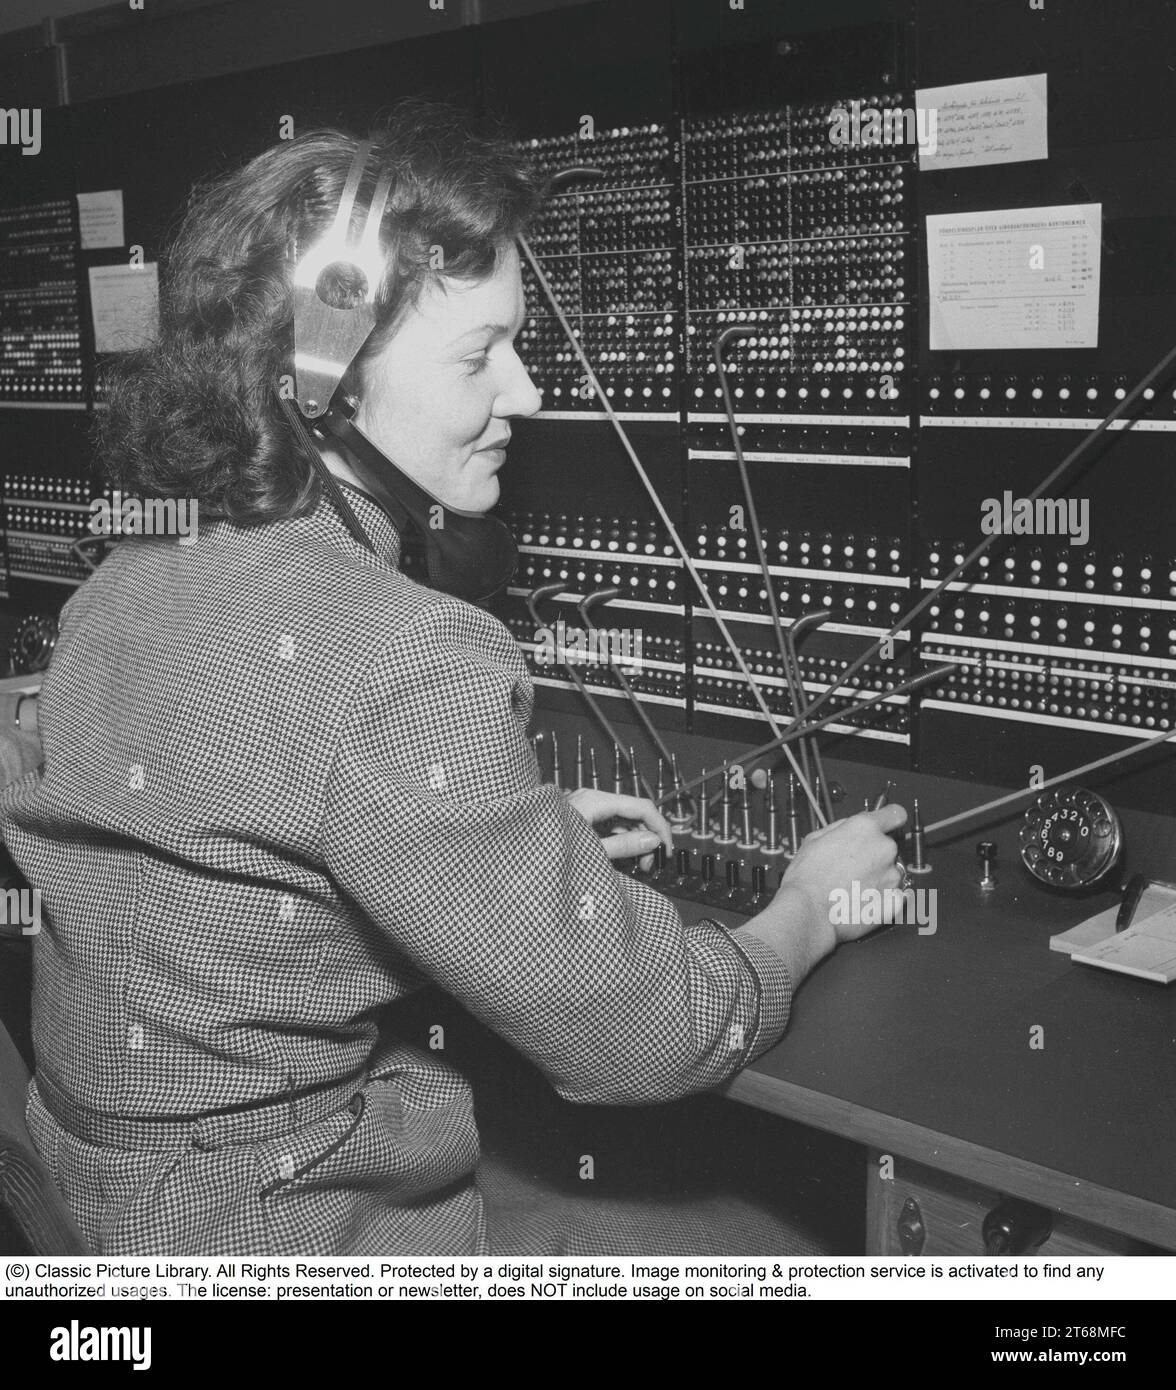 Telephony in the 1950s. Woman working at a telephone switchboard as it's operatos. A telephone communication system that was manually operated where the incoming calls were forwarded and redirected to the another telephone number by the operator, in this case locally within the building serving a company or an organization with many internal telephone lines. The switchboard operator could take messages, put you on hold if the line was busy. Sweden 1953. Kristoffersson ref BM99-7 Stock Photo